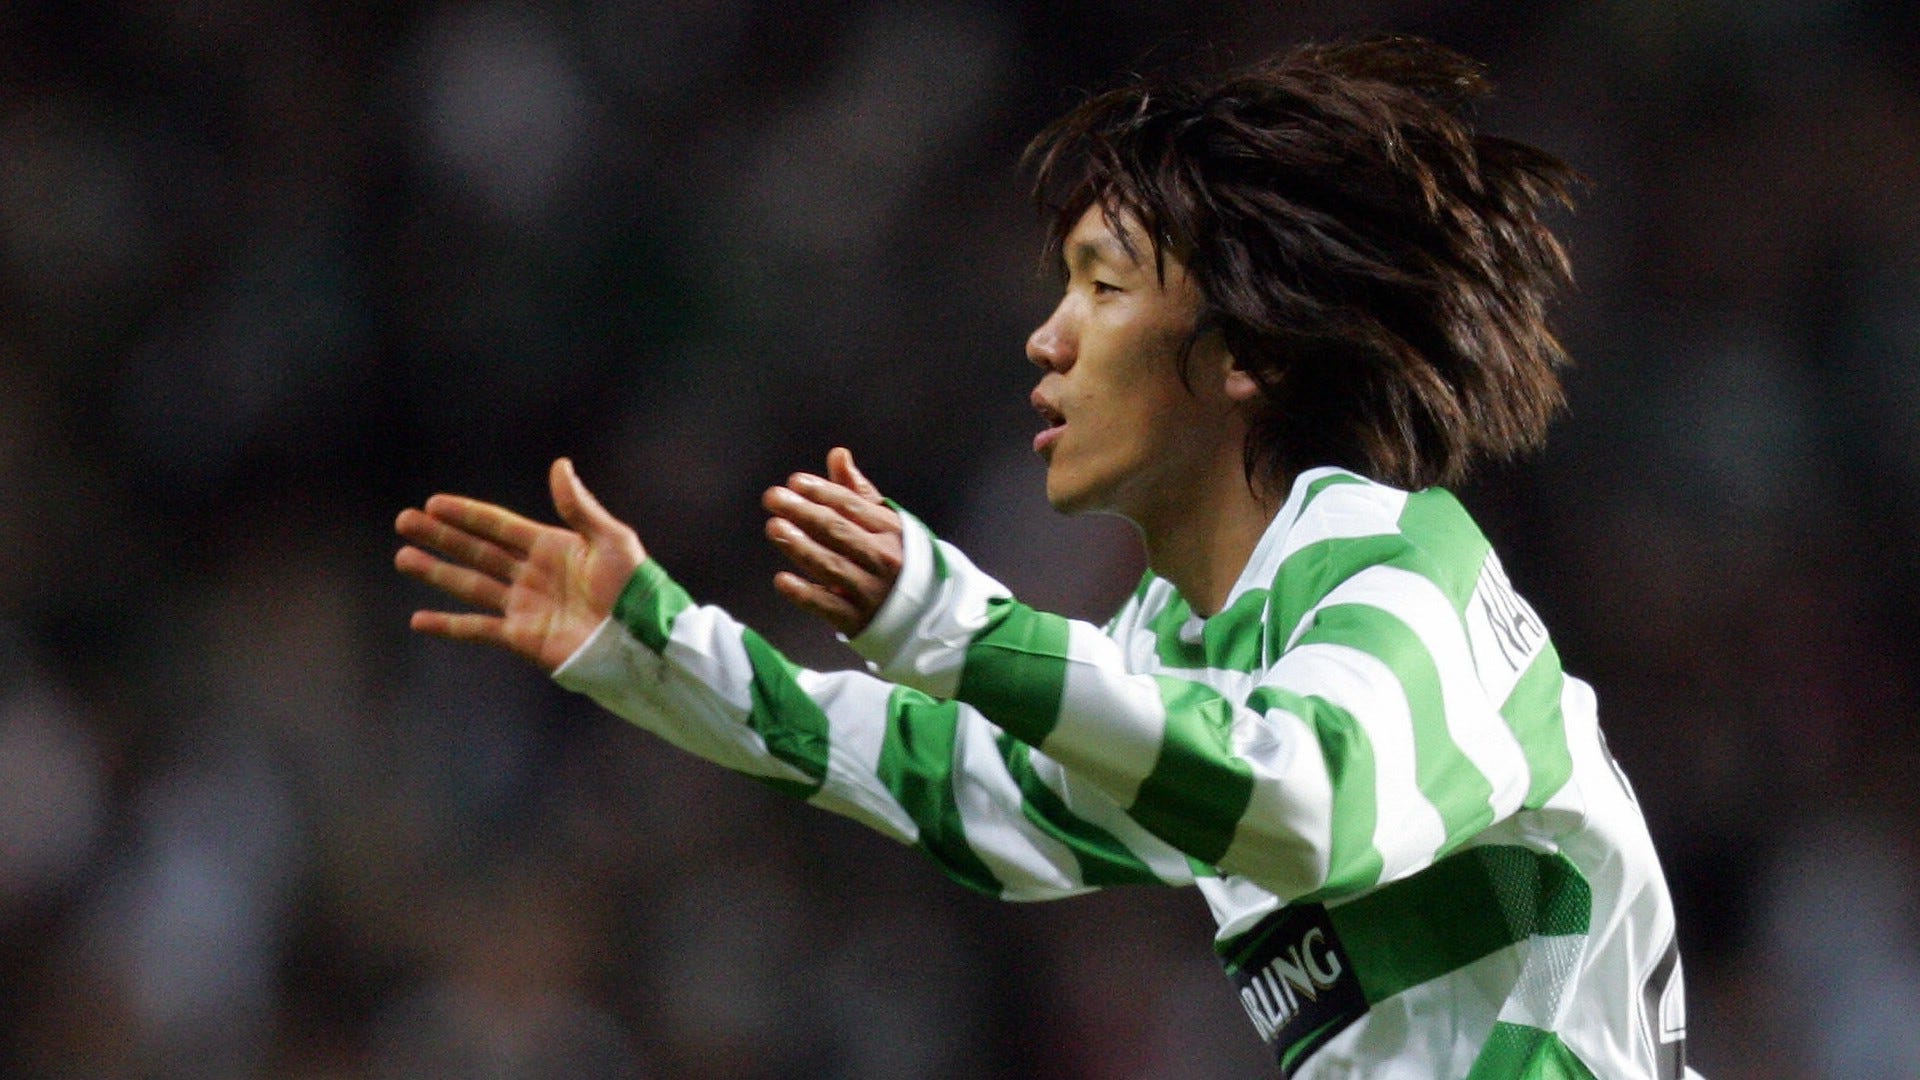 Celtic Insider - 🗓 ON THIS DAY in 2006, Shunsuke Nakamura scored a  SENSATIONAL free kick to secure a 1-0 Champions League win over Manchester  United, and see the Hoops through to